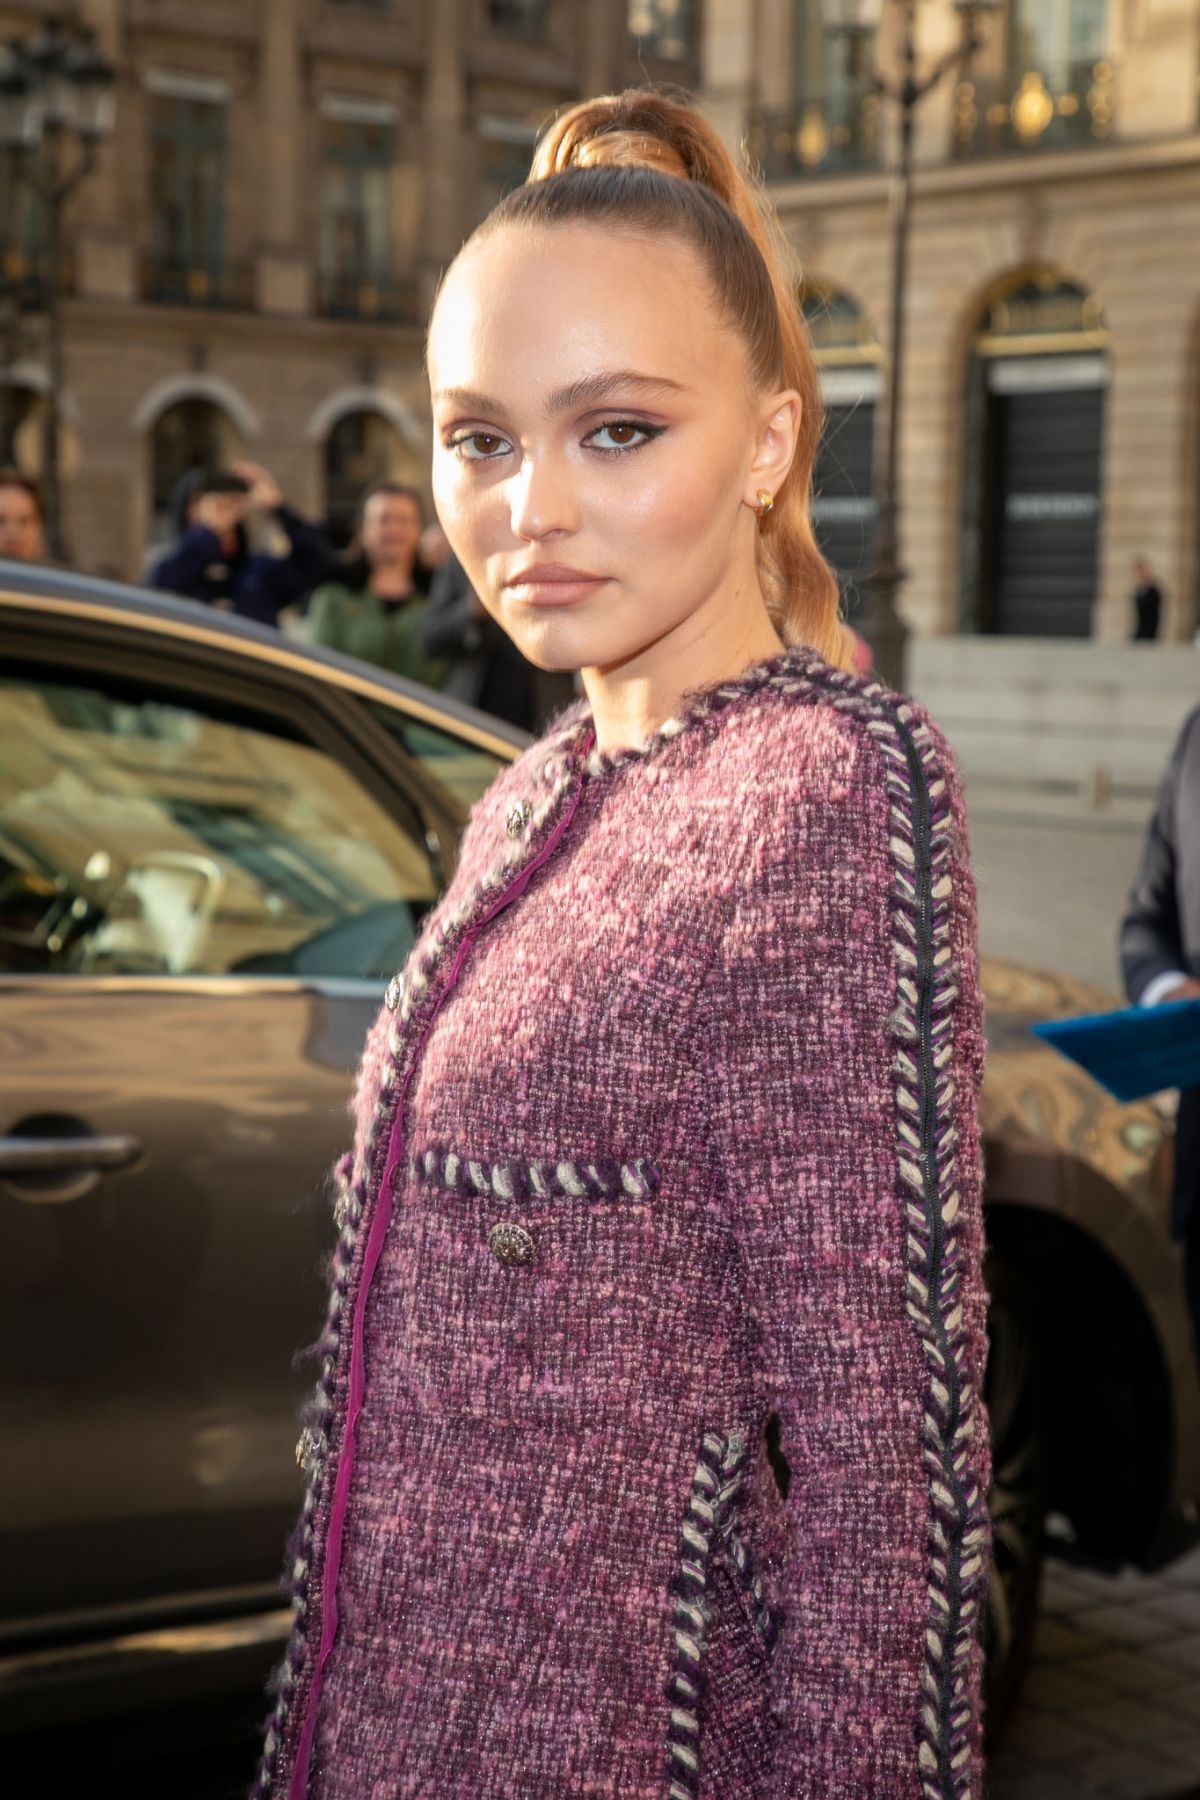 LILY-ROSE DEPP at Chanel J12 Cocktail in Paris 05/02/2019 – HawtCelebs